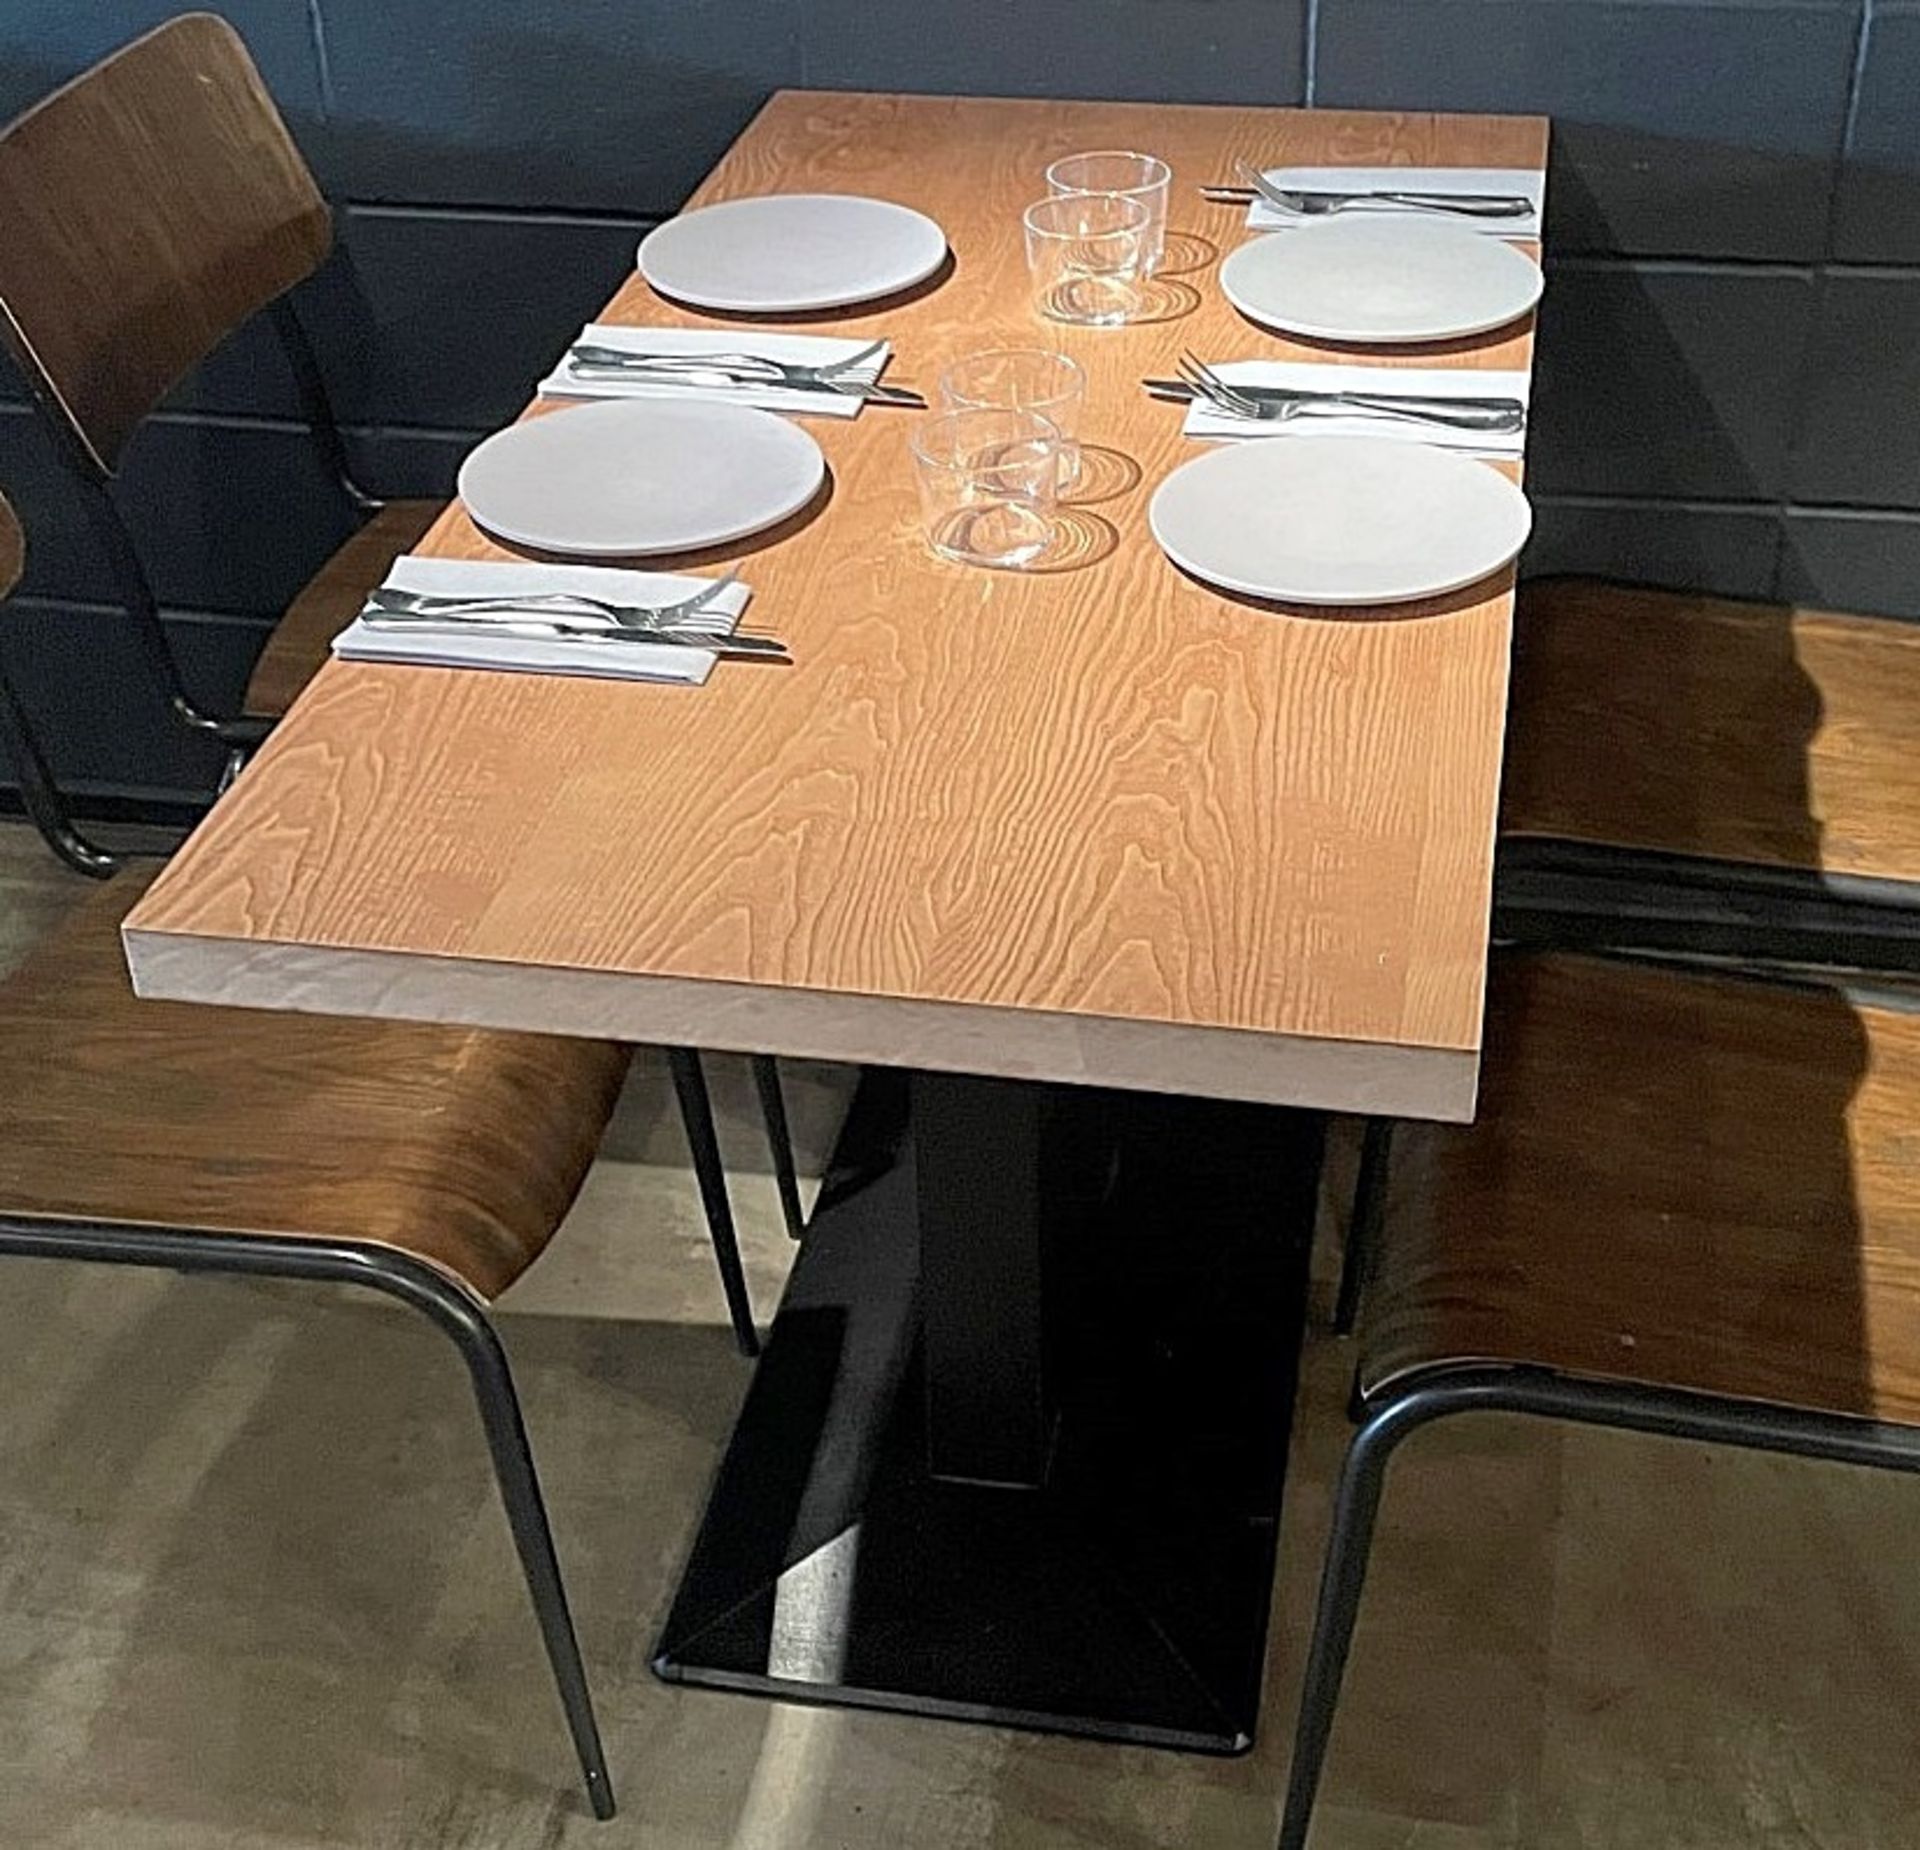 4 x Rectangular Wood-Topped Bistro Tables With Sturdy Metal Bases - Dimensions (approx): 120 x 60 - Image 2 of 2